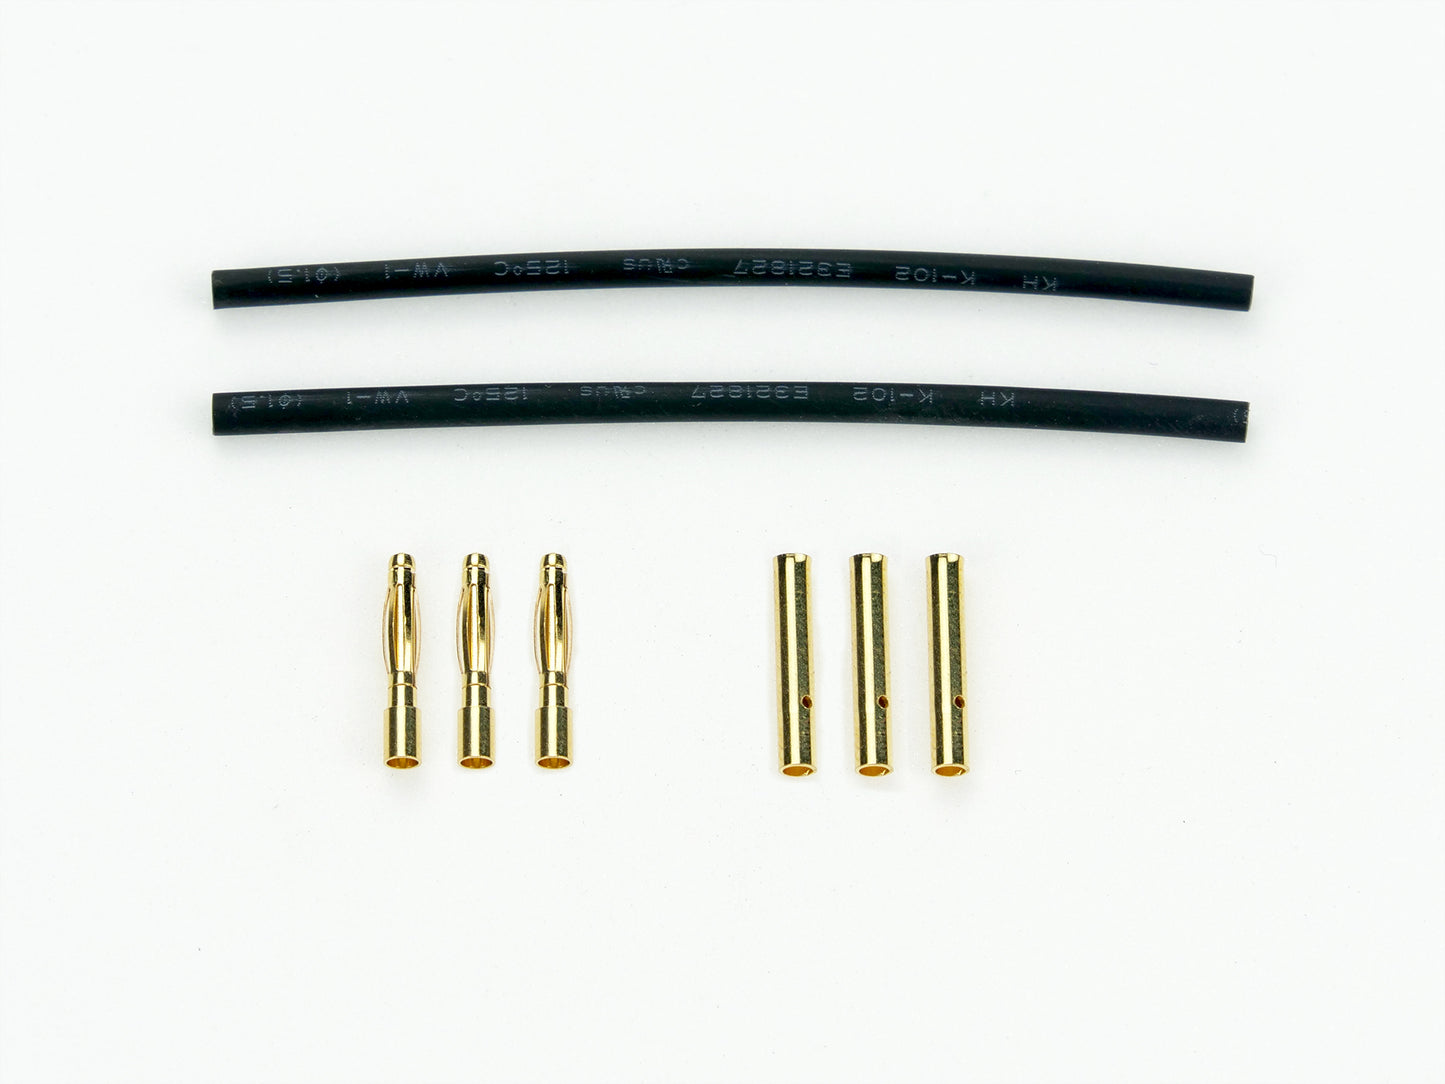 2.0mm Gold Plated Banana Plugs for T1 VTOL - HEEWING